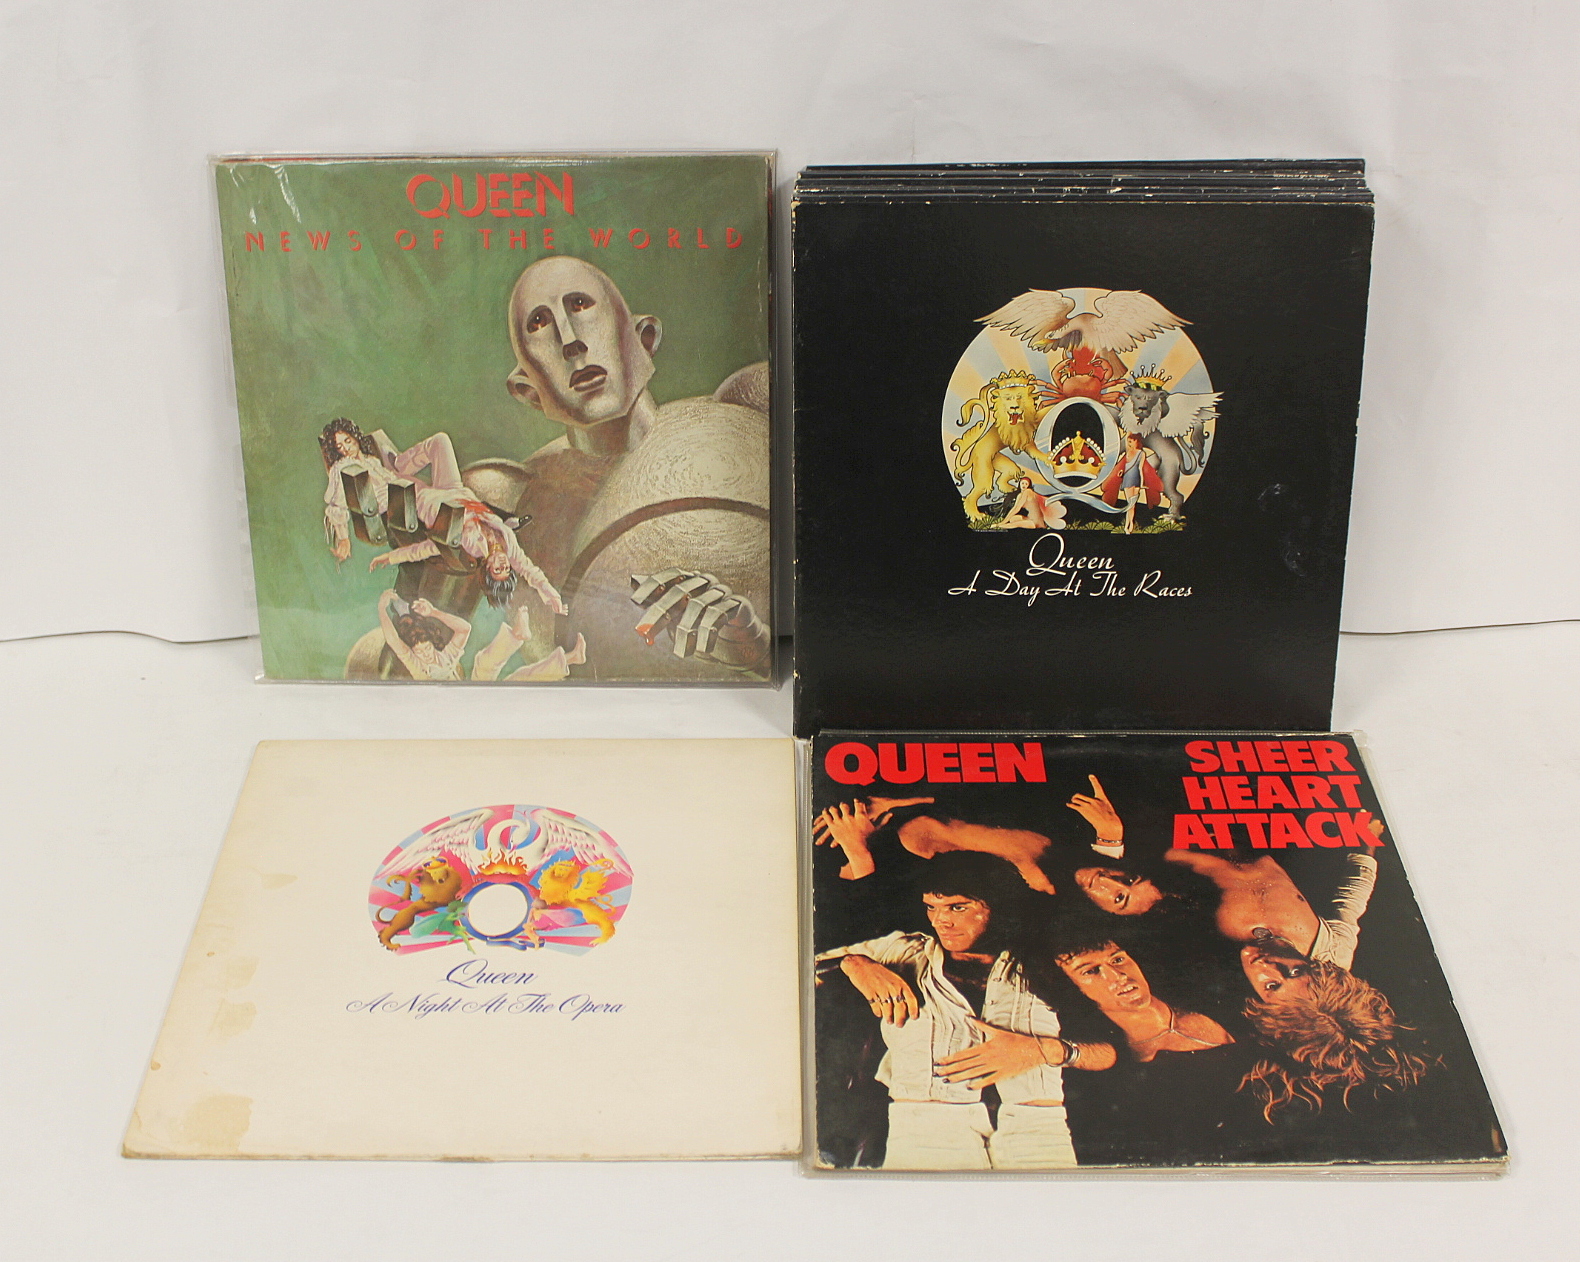 Queen LPs to include 9 x 'A Day At The Races', 2 x 'A Night At The Opera', 'Sheer Heart Attack'